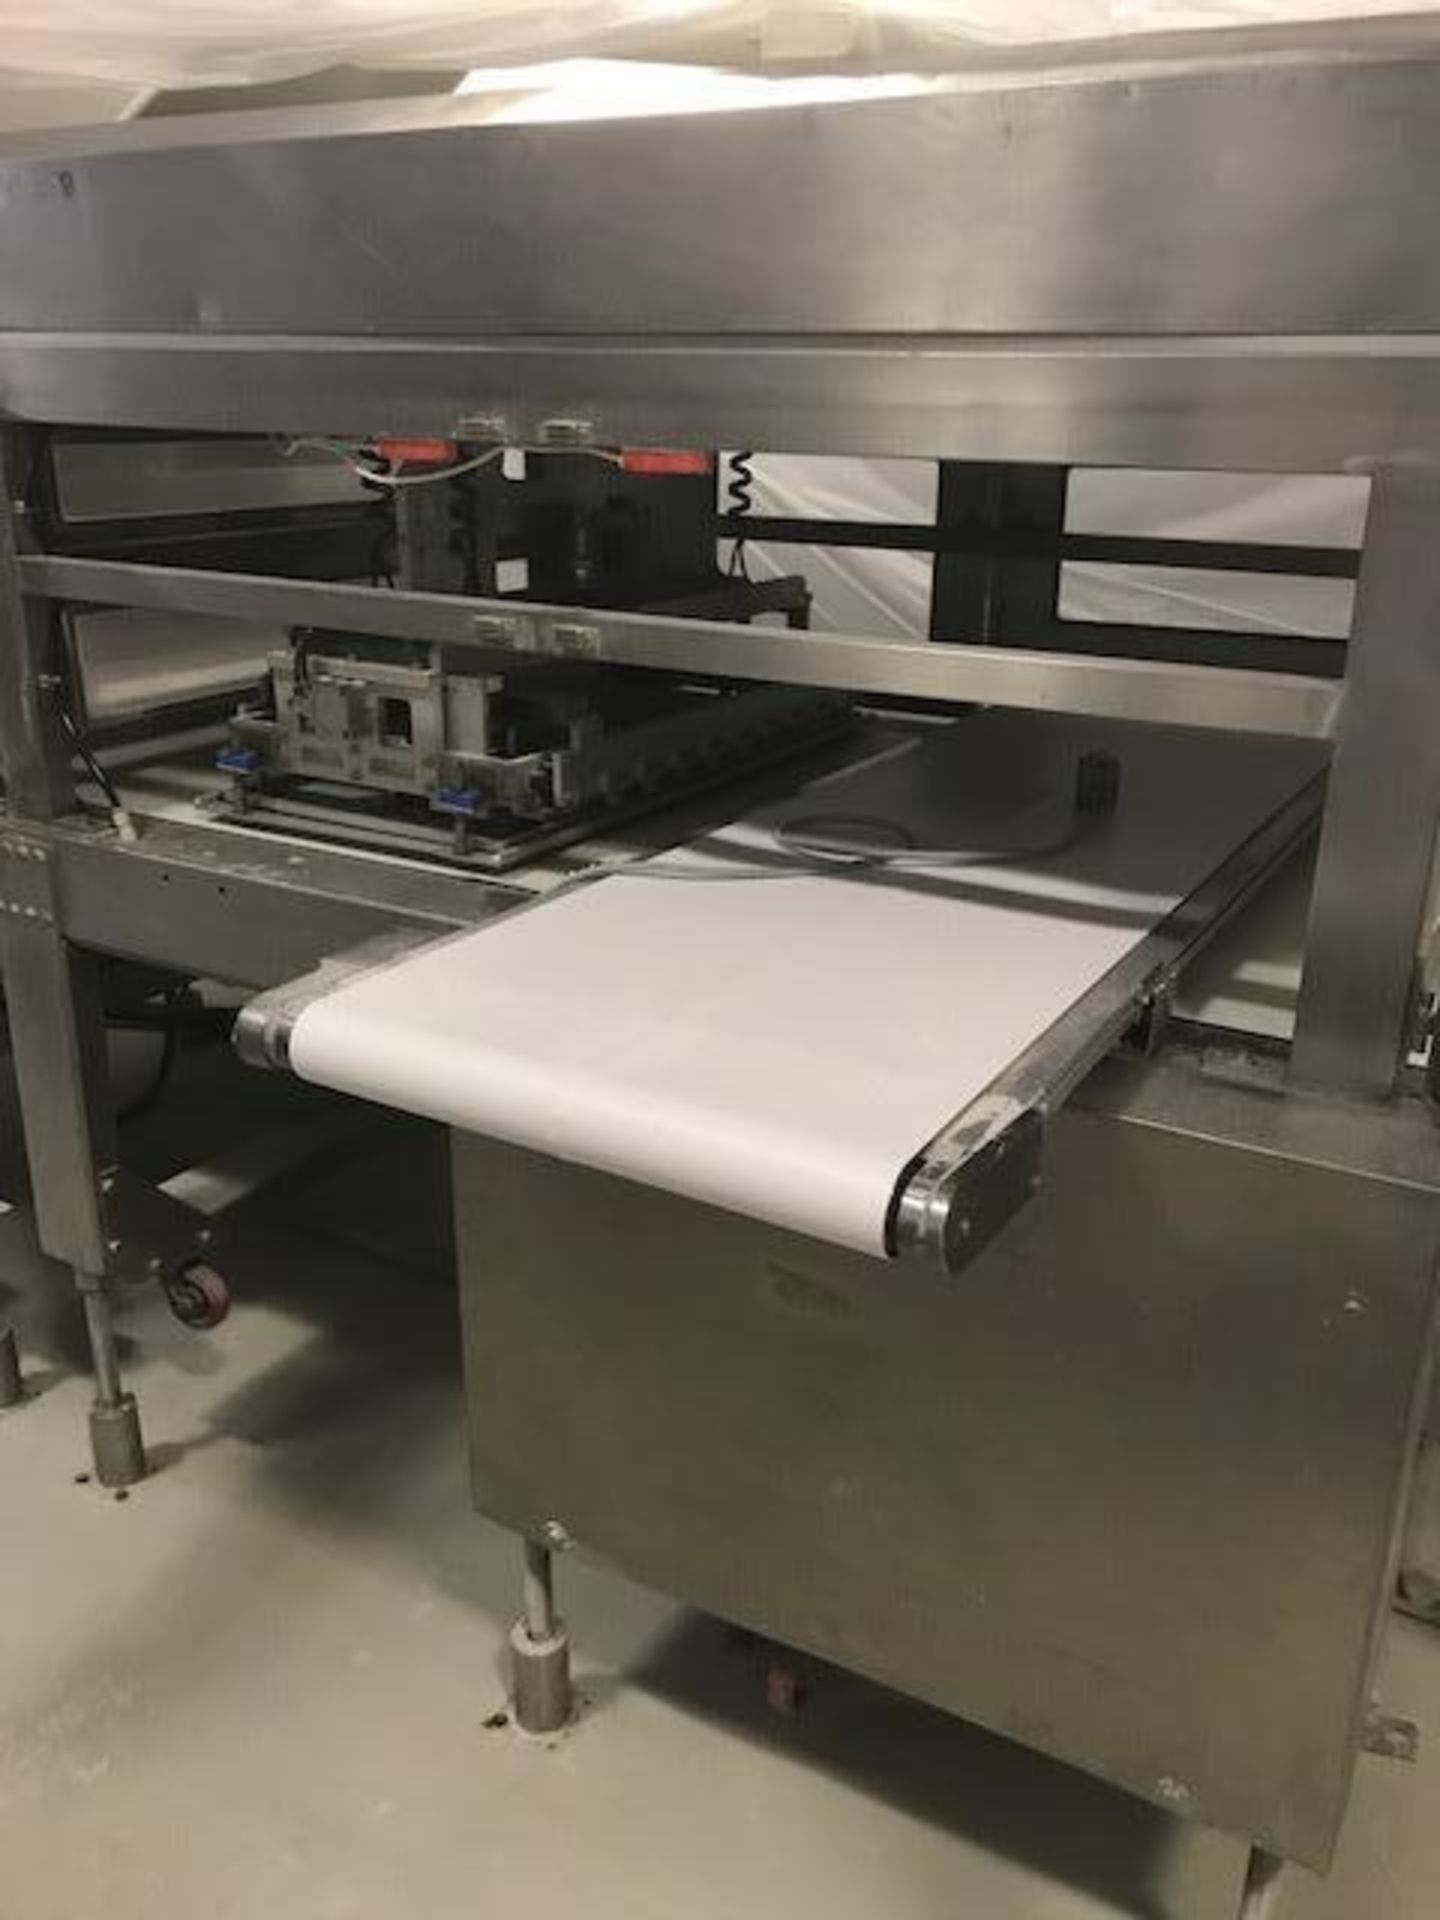 Canol waste dough removal pick and place {Located in Lodi, CA} - Image 2 of 3